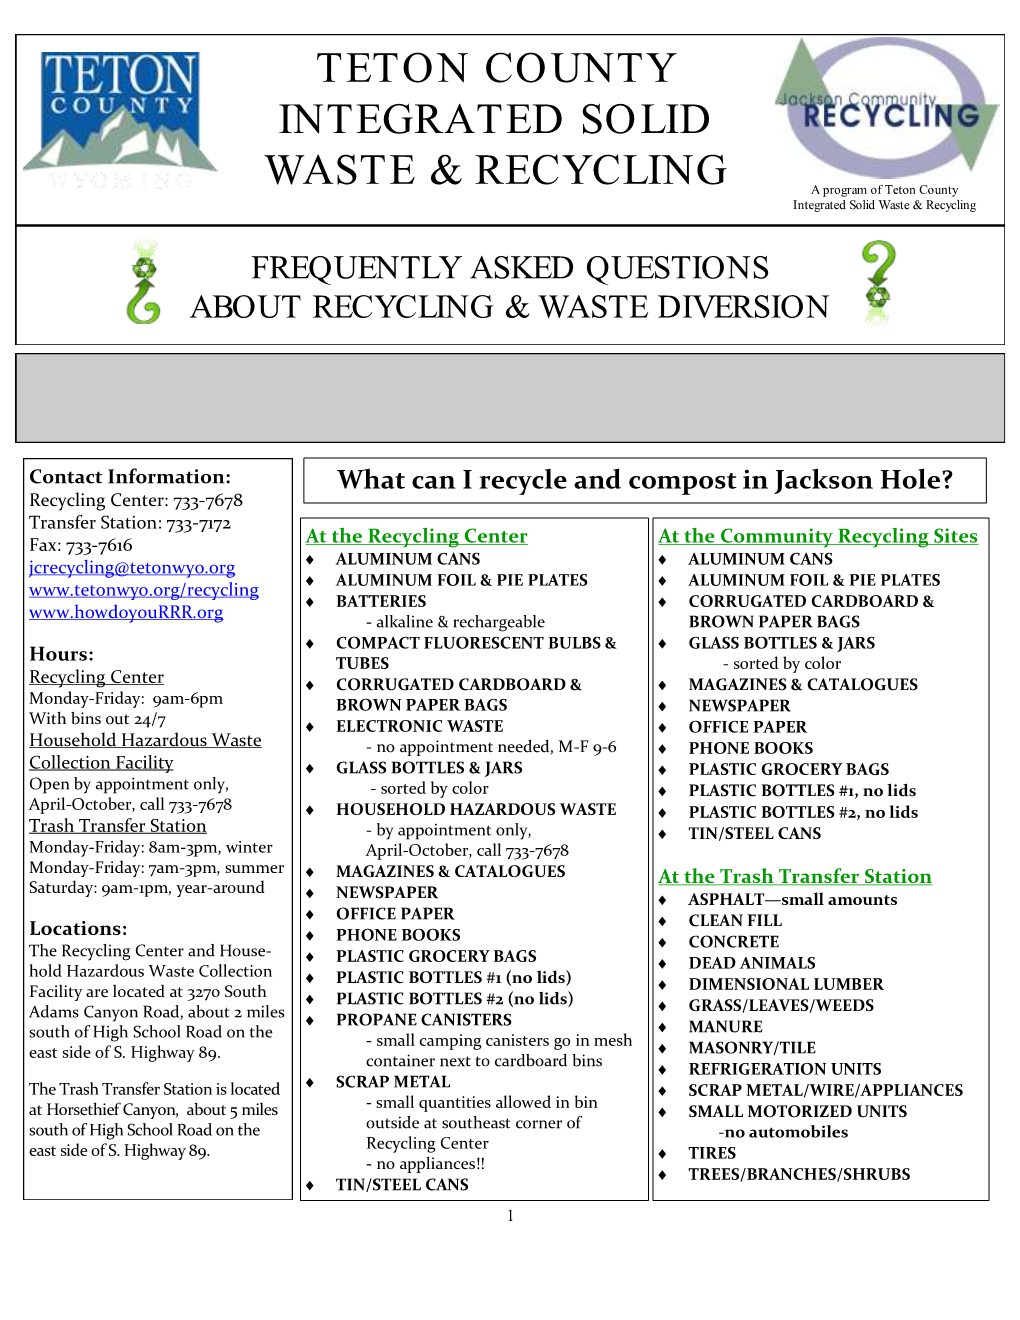 Teton County Integrated Solid Waste & Recycling